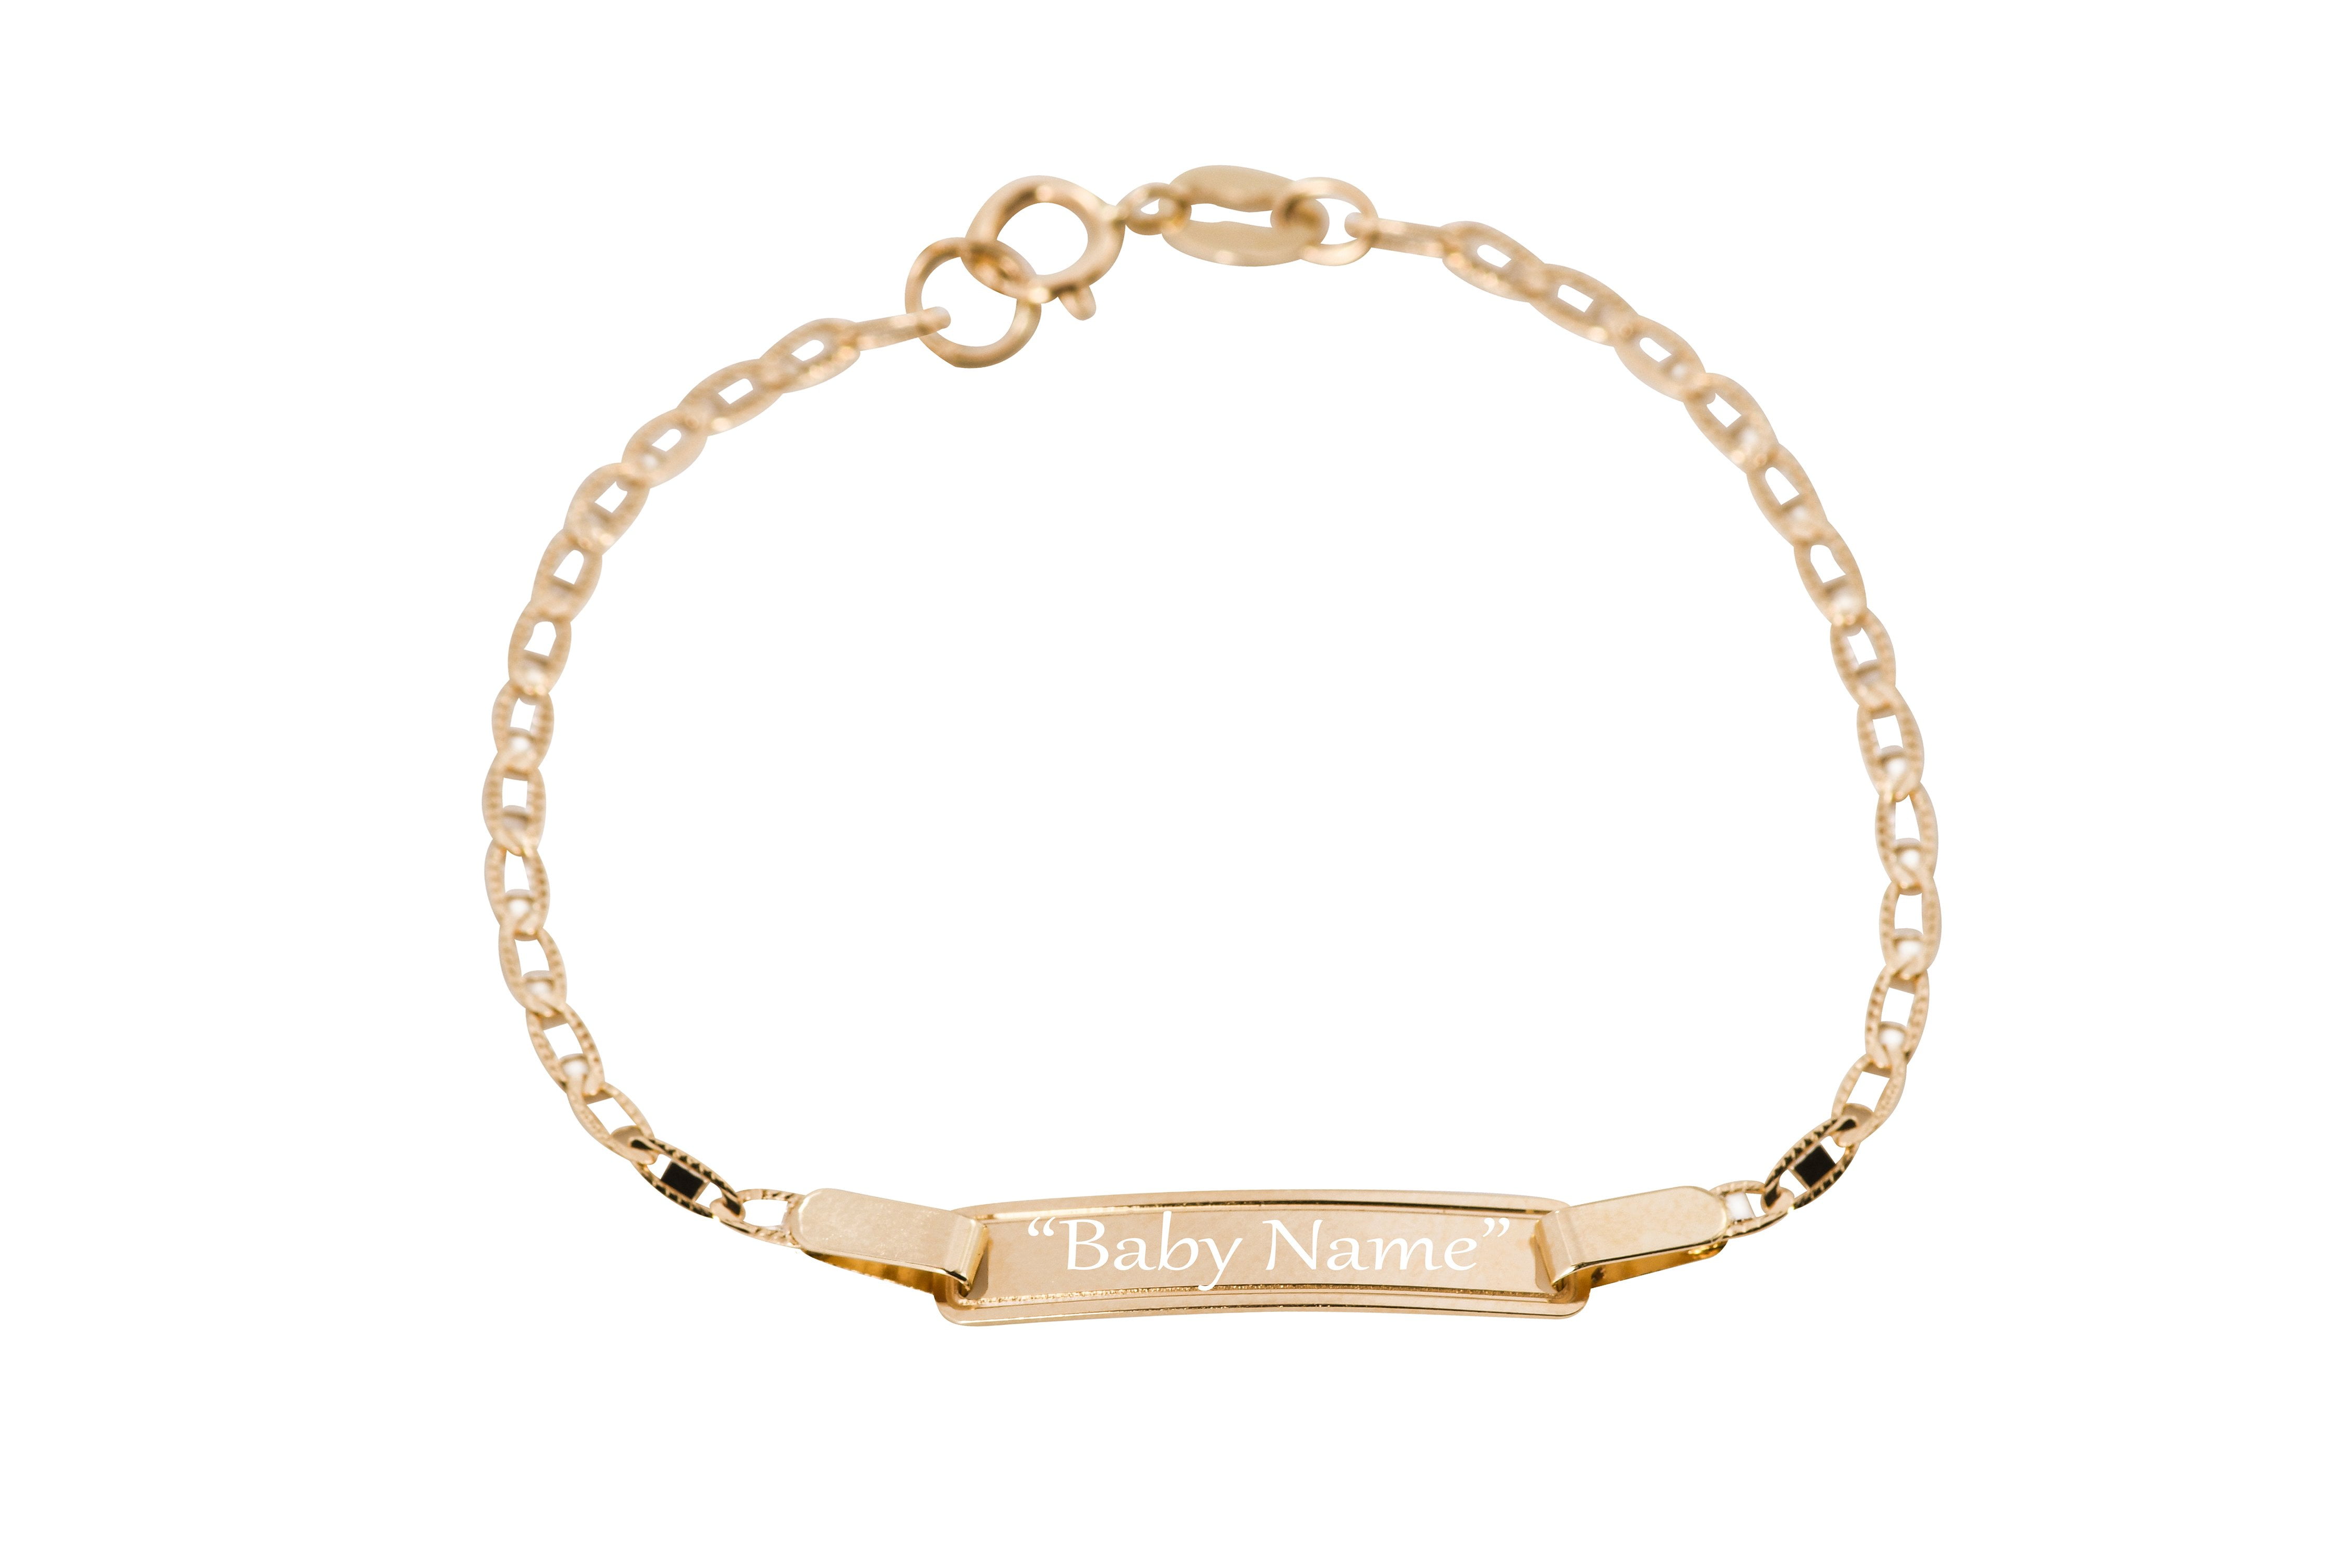 18K Gold Filled Baby ID Bracelet With Free Engraving 6' adjustable Chain NYC 